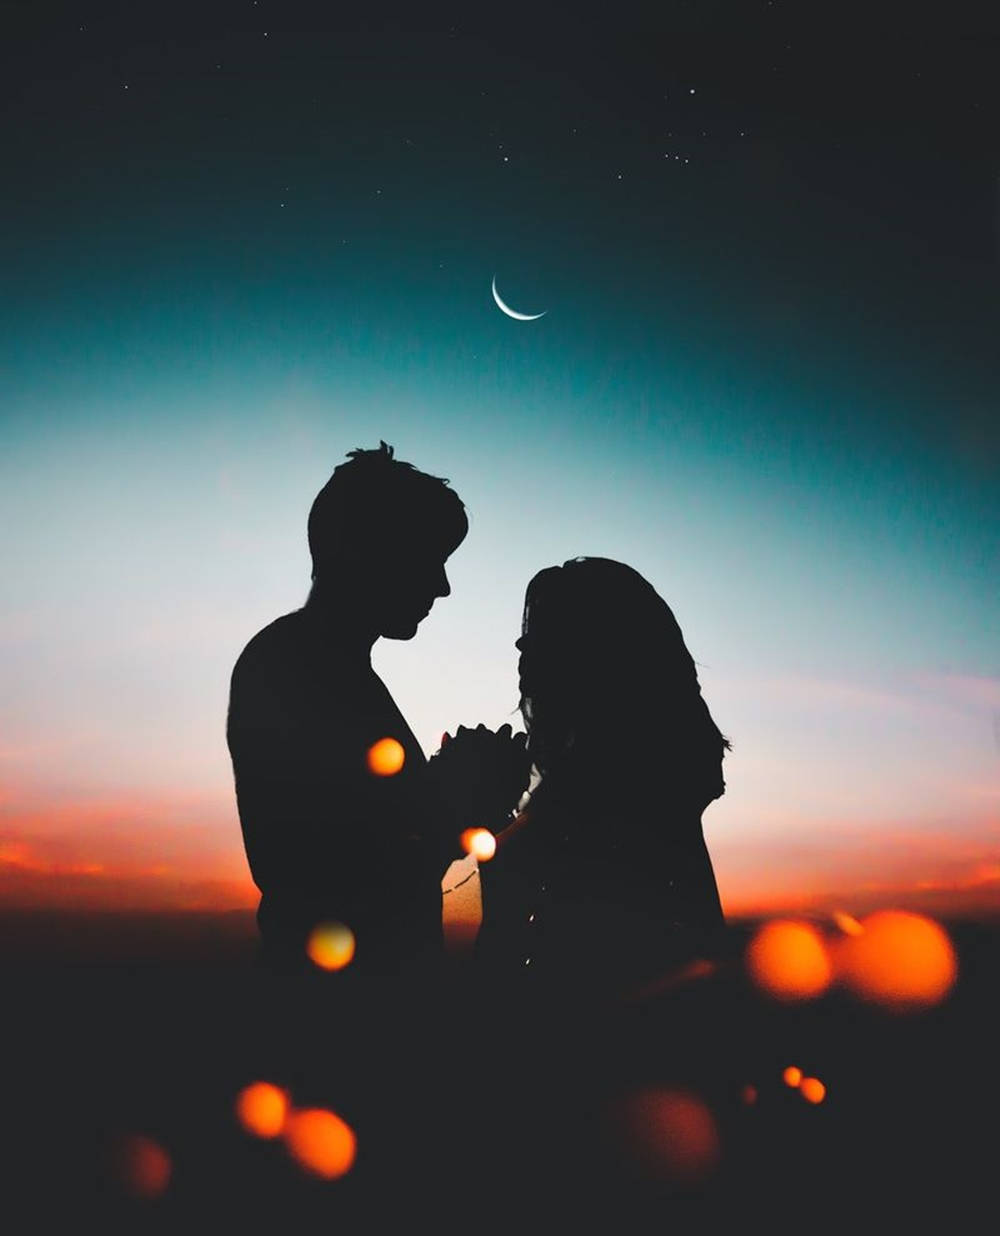 Aesthetic Couple With Crescent Moon Wallpaper